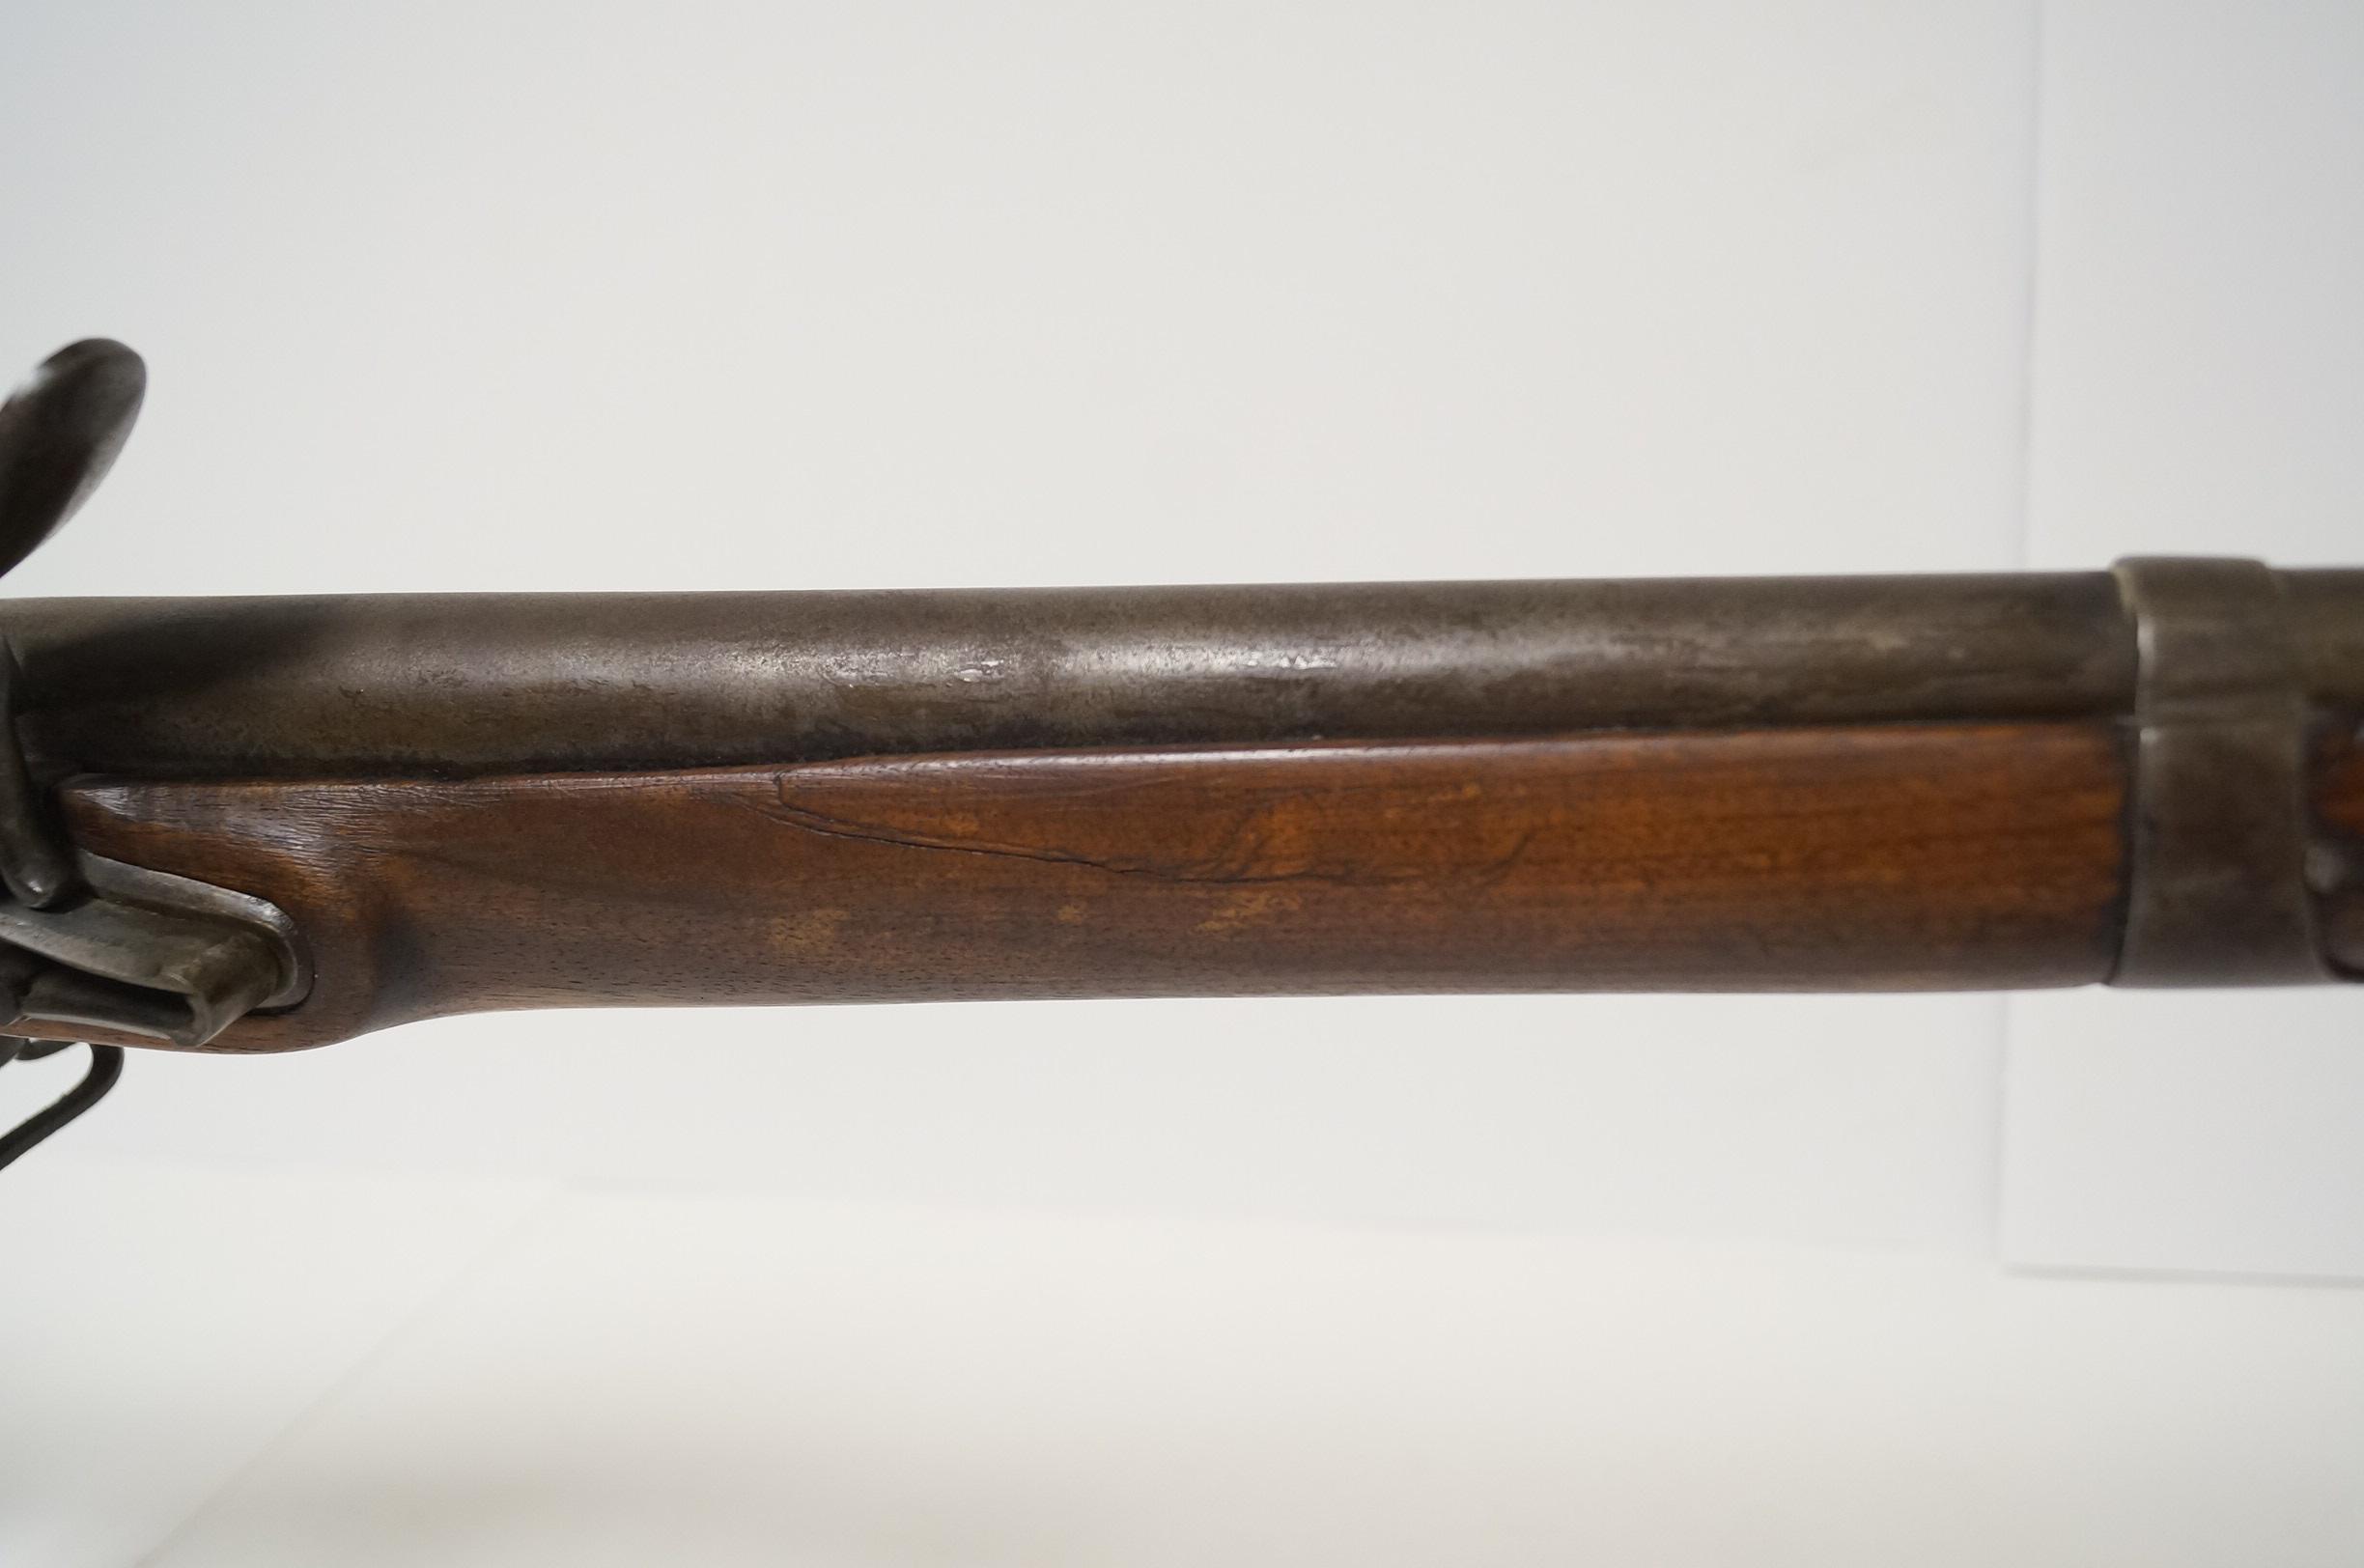 Unique Virginia State Issued First 1814 Model Springfield Standard Issue Army Flintlock Musket